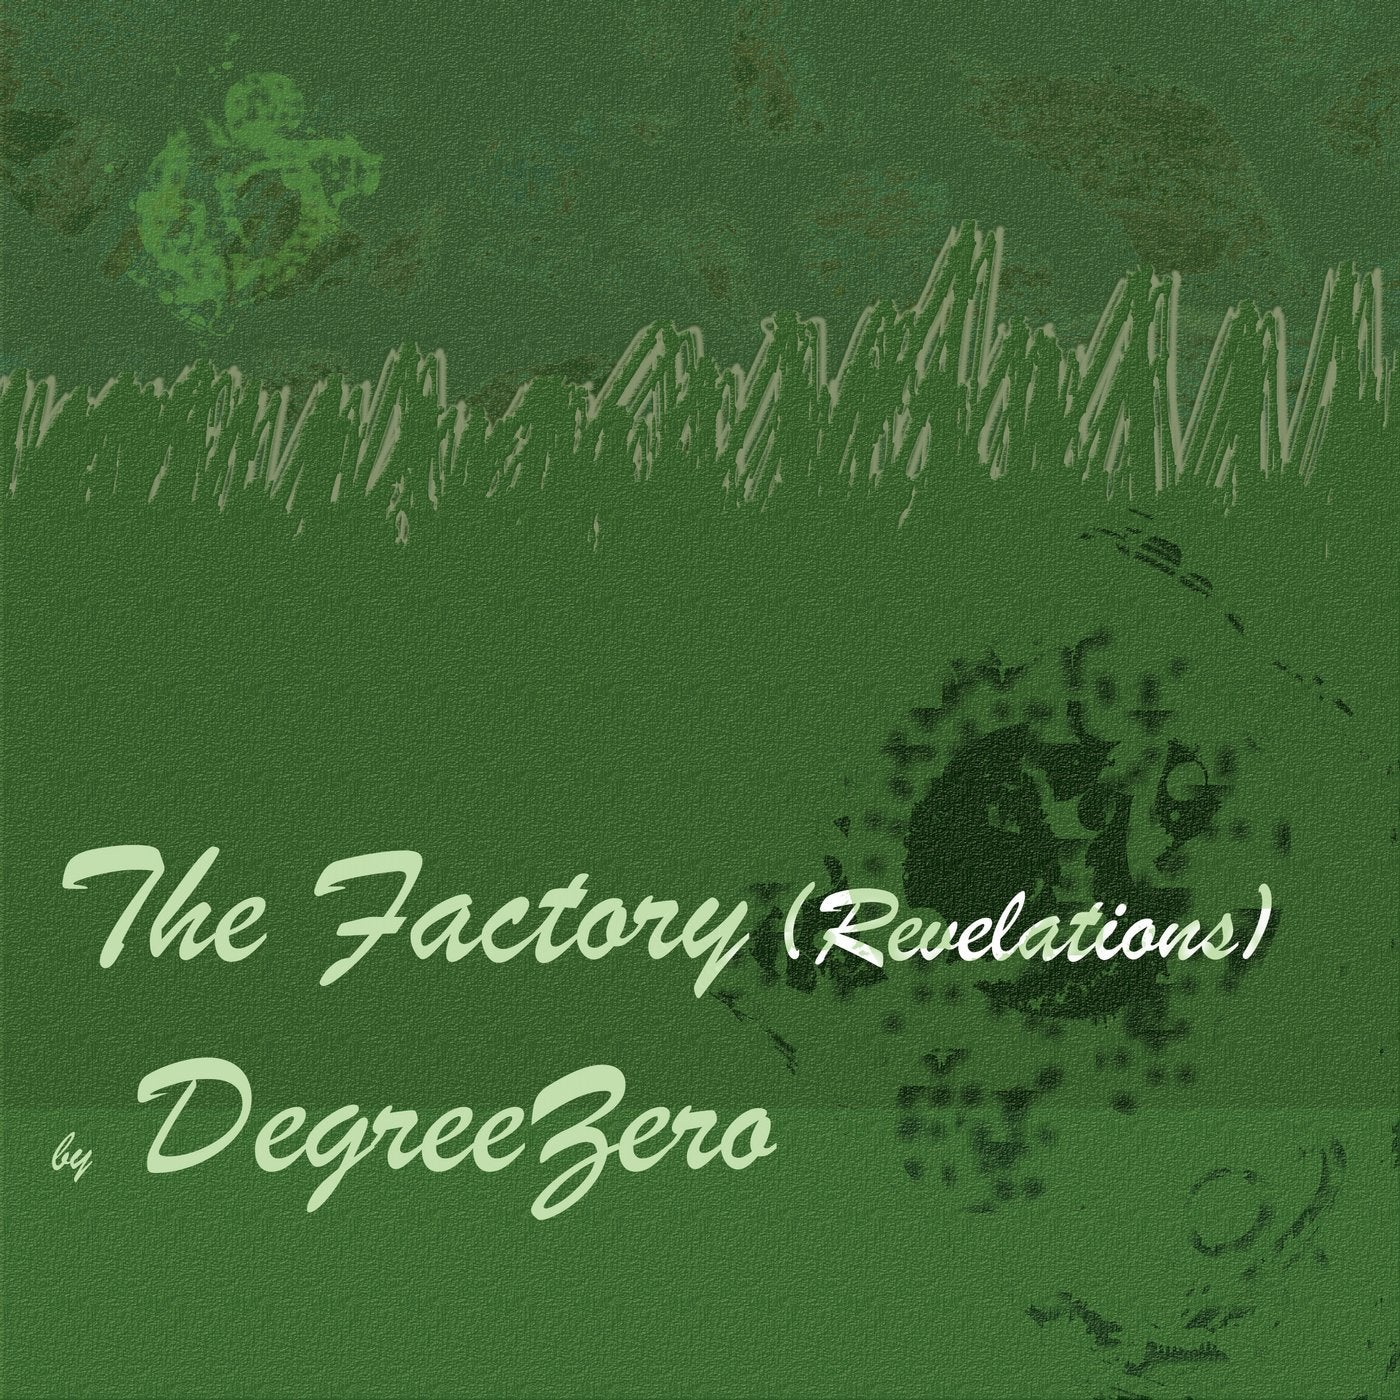 The Factory (Revelations)